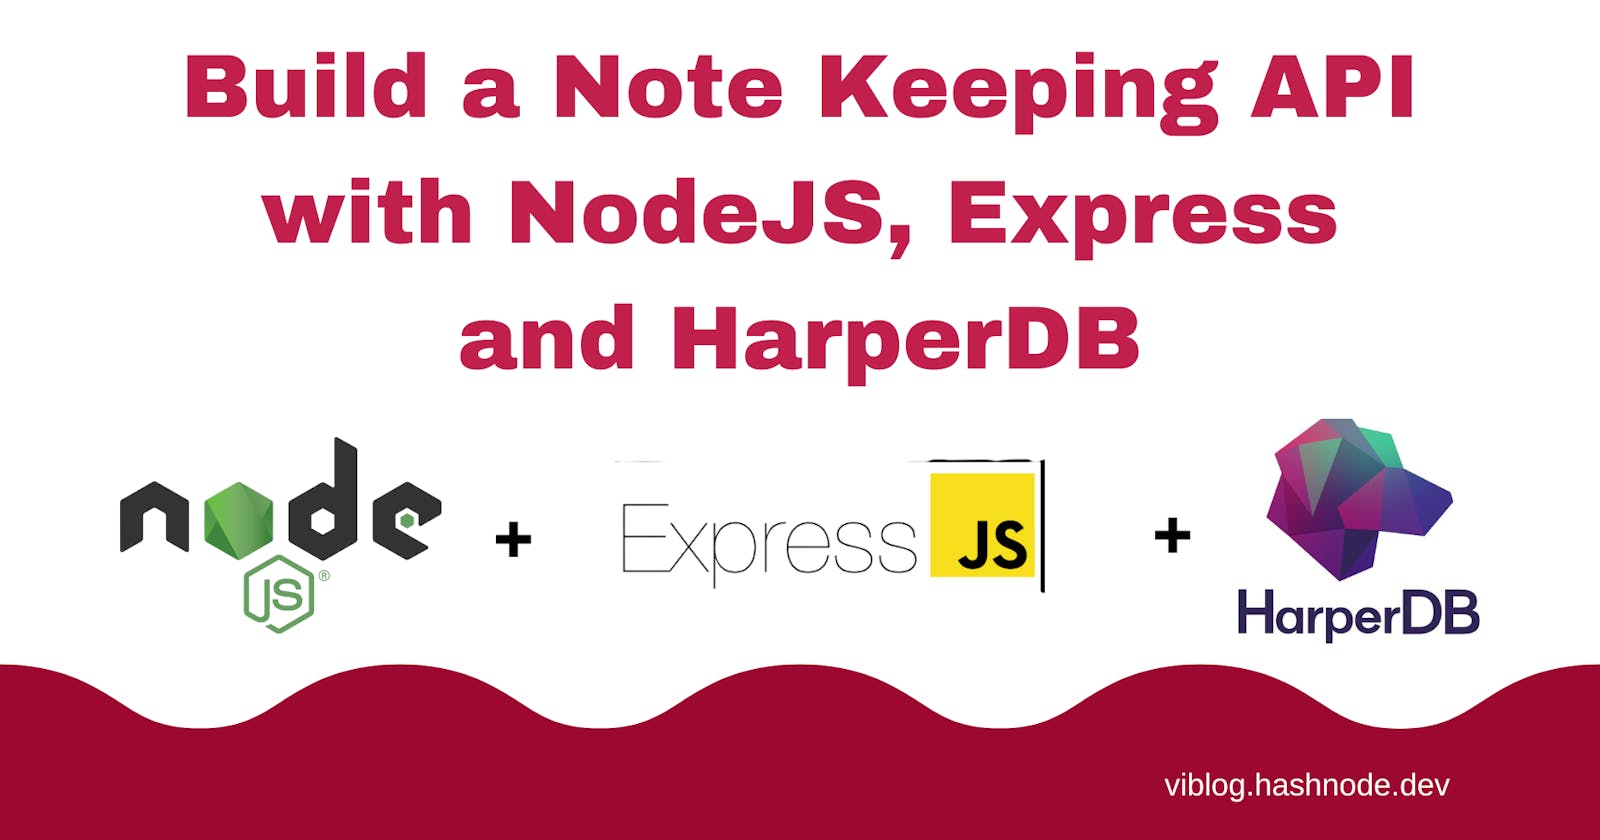 Build a Note Keeping API with NodeJS, Express, and HarperDB.